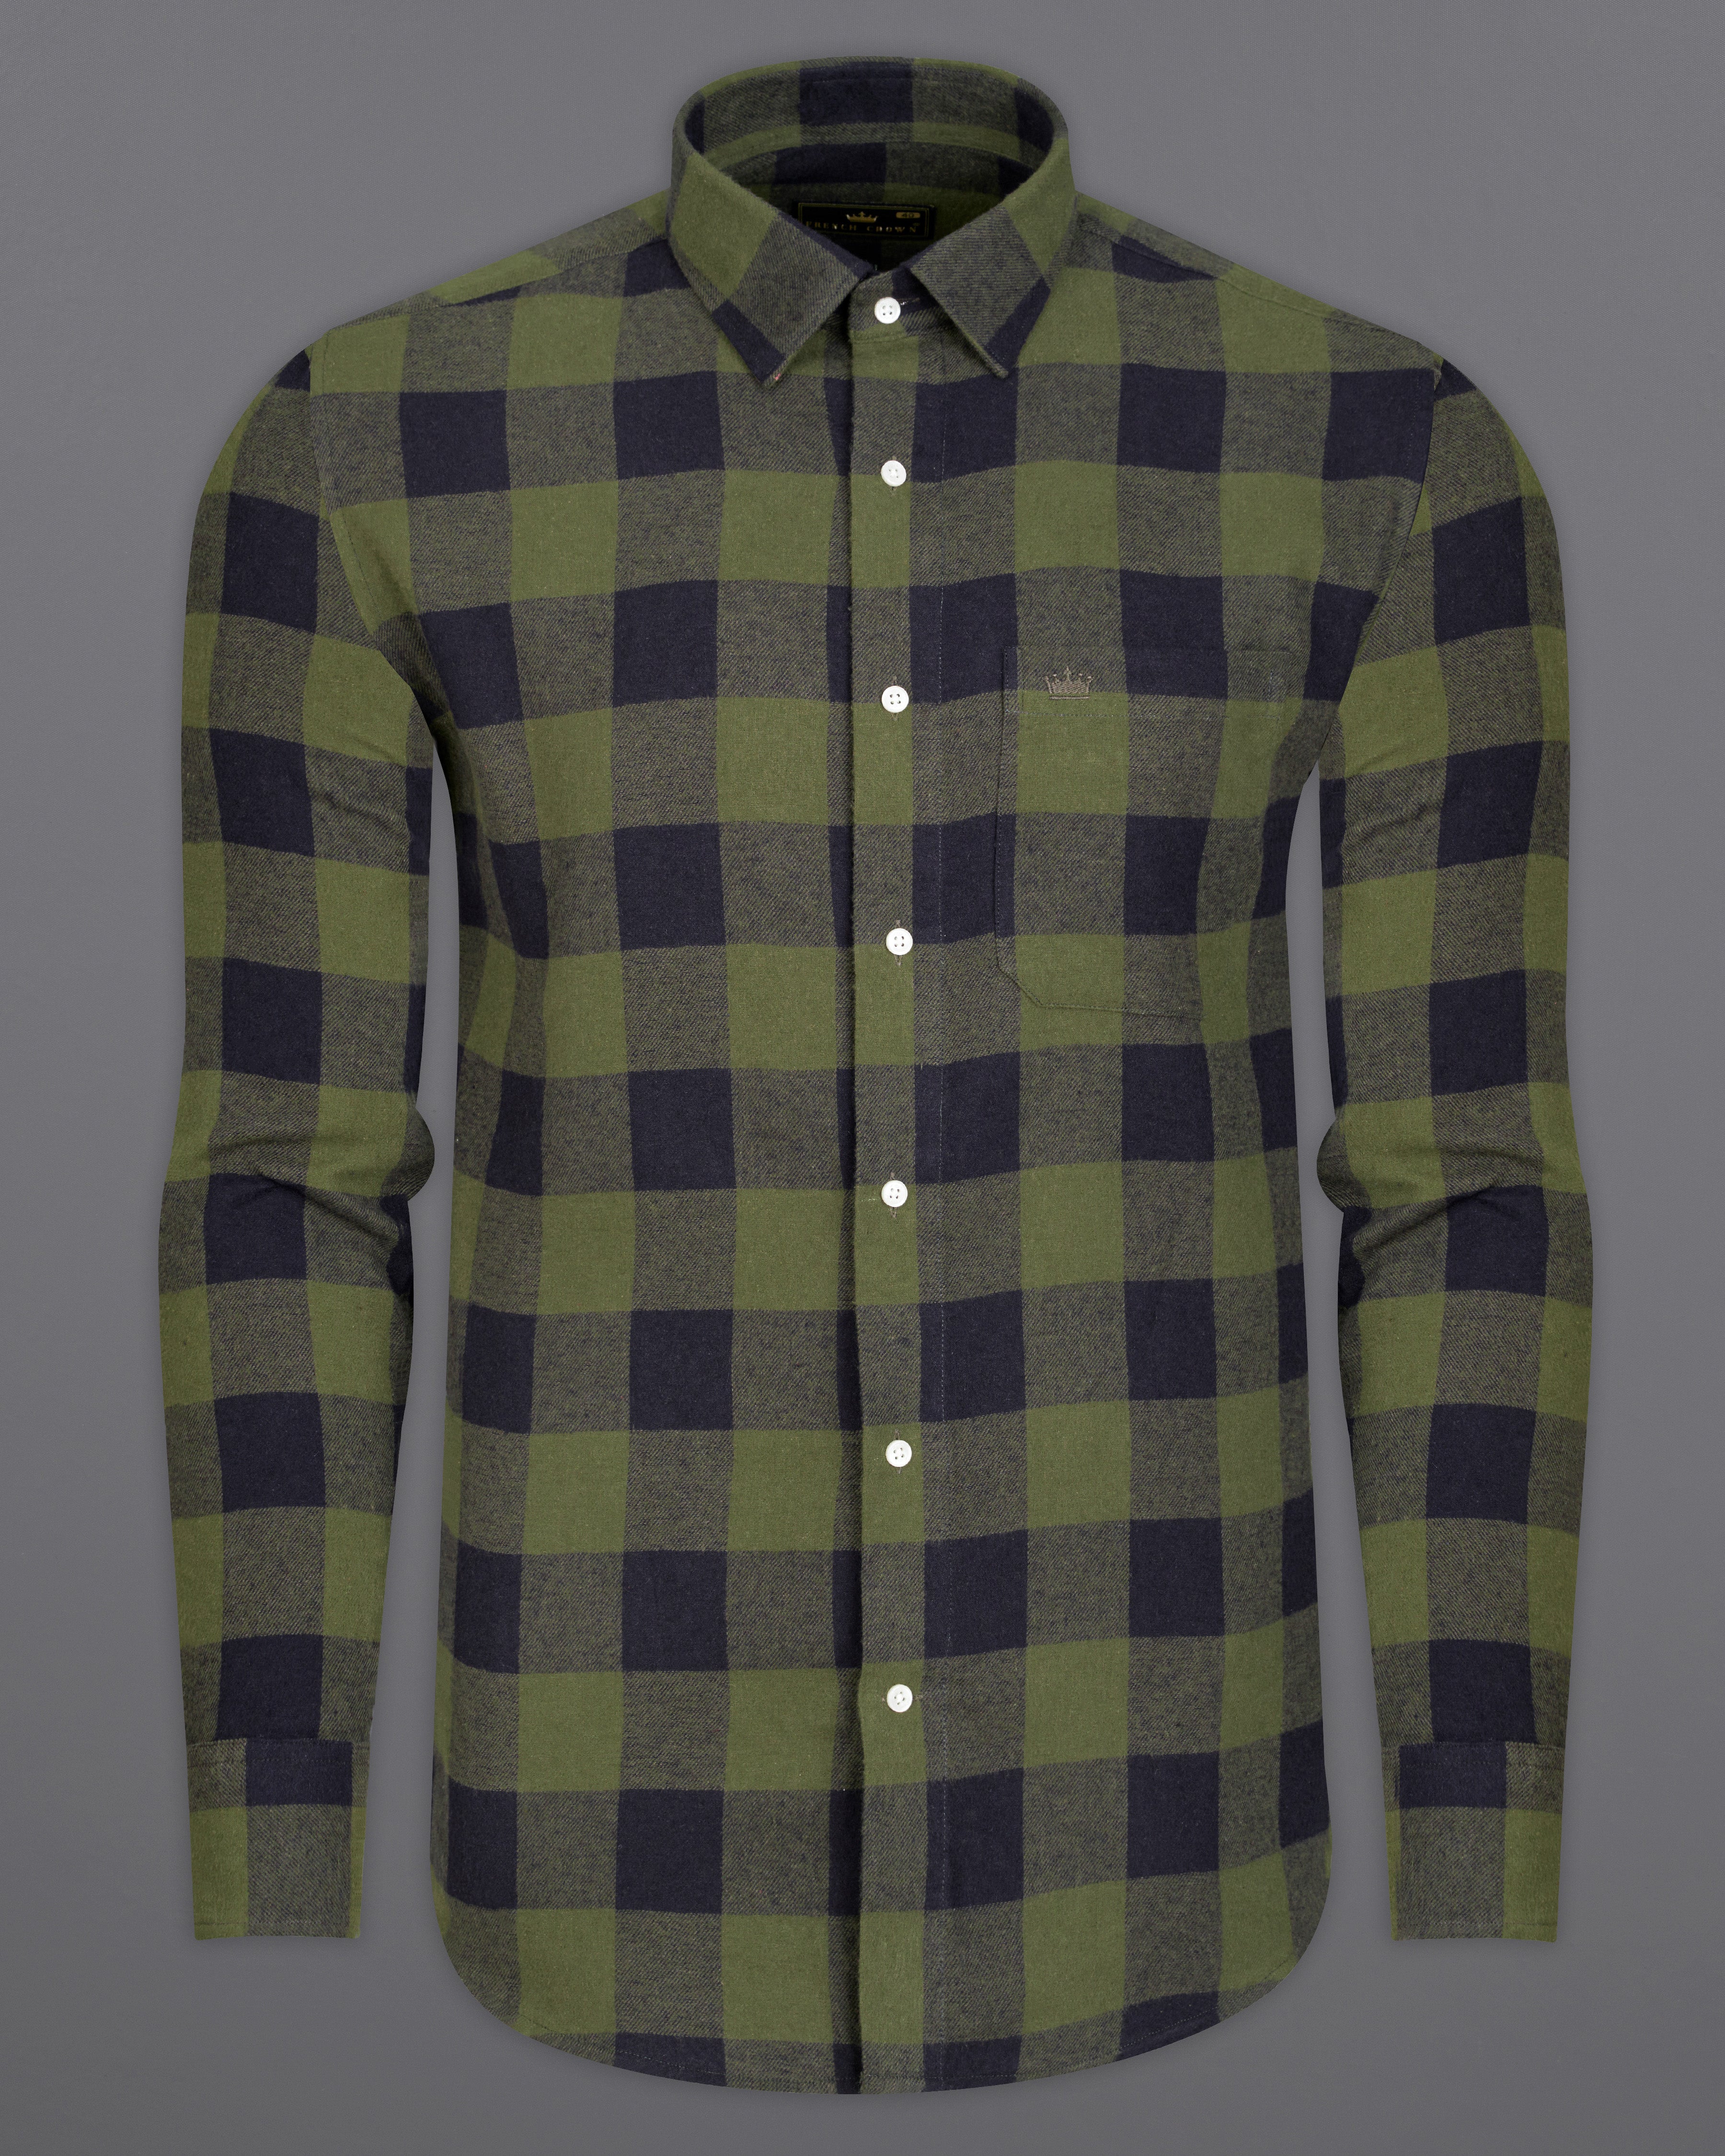 Finch Green with Charade Gray Checked Flannel Overshirt 9535-OS-38, 9535-OS-H-38, 9535-OS-39, 9535-OS-H-39, 9535-OS-40, 9535-OS-H-40, 9535-OS-42, 9535-OS-H-42, 9535-OS-44, 9535-OS-H-44, 9535-OS-46, 9535-OS-H-46, 9535-OS-48, 9535-OS-H-48, 9535-OS-50, 9535-OS-H-50, 9535-OS-52, 9535-OS-H-52